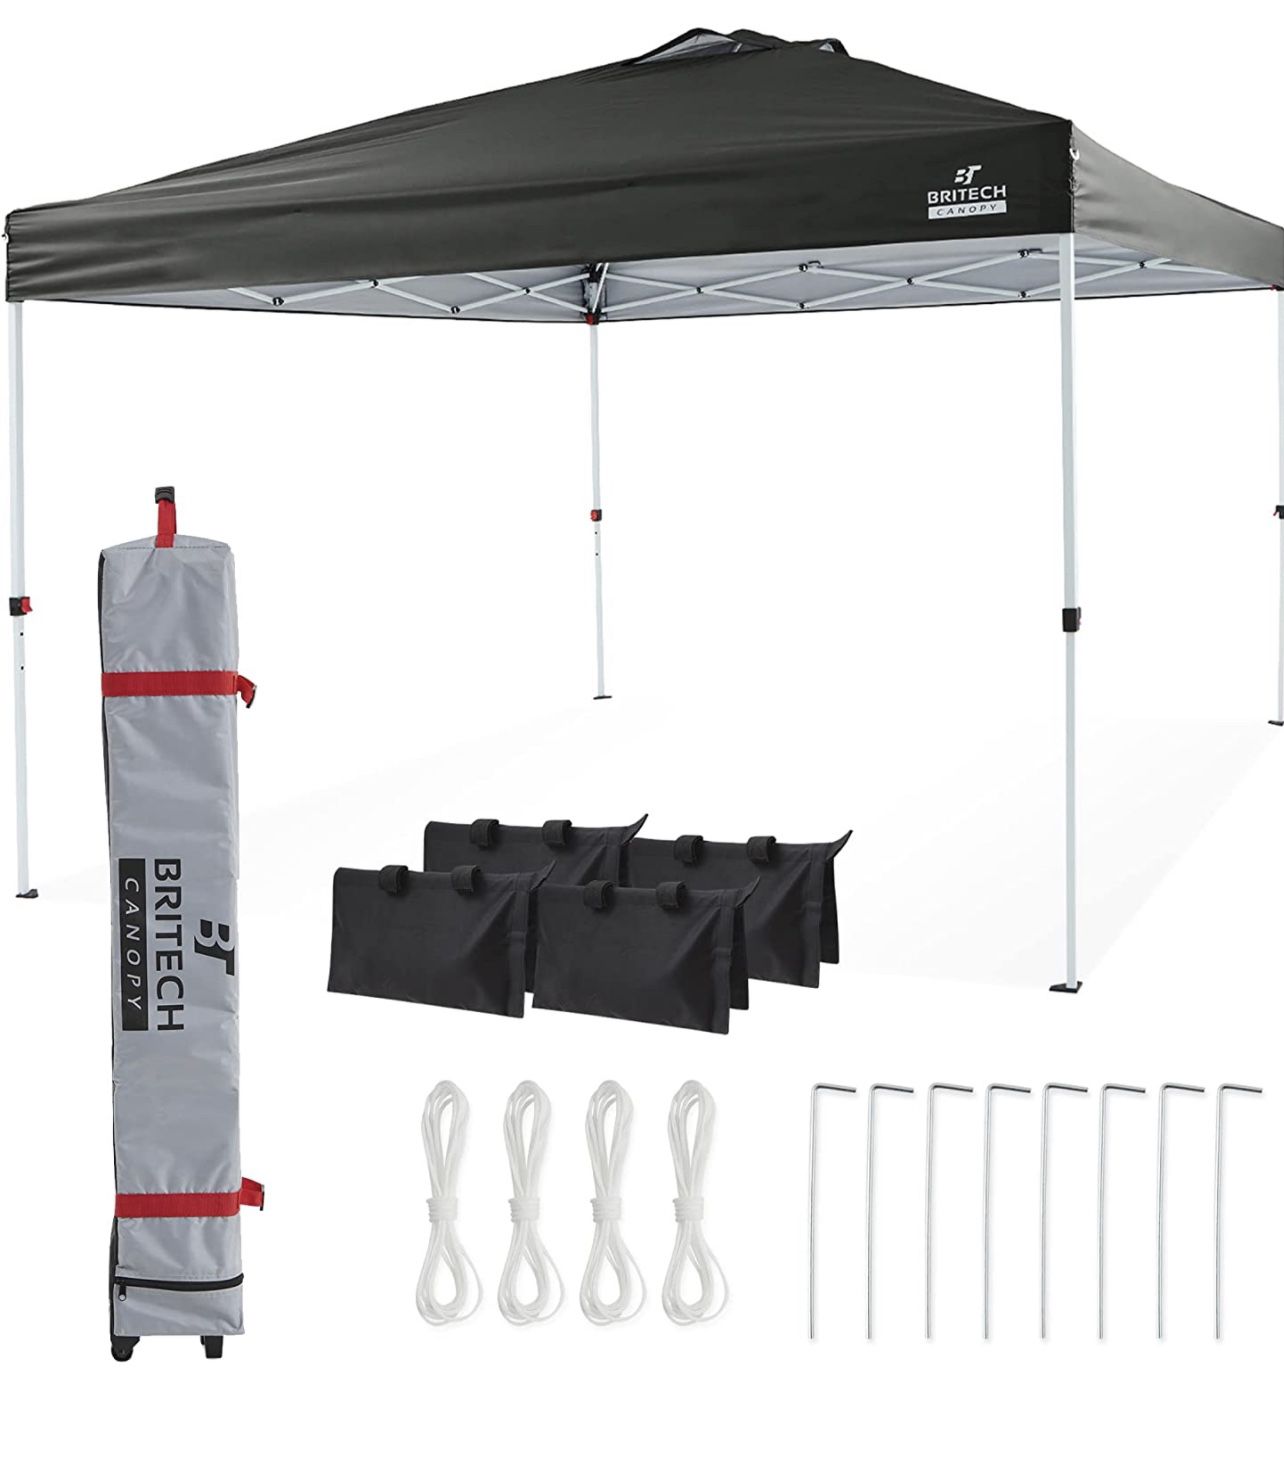 Canopy Durable Pop-up Canopy (Black) 6x6